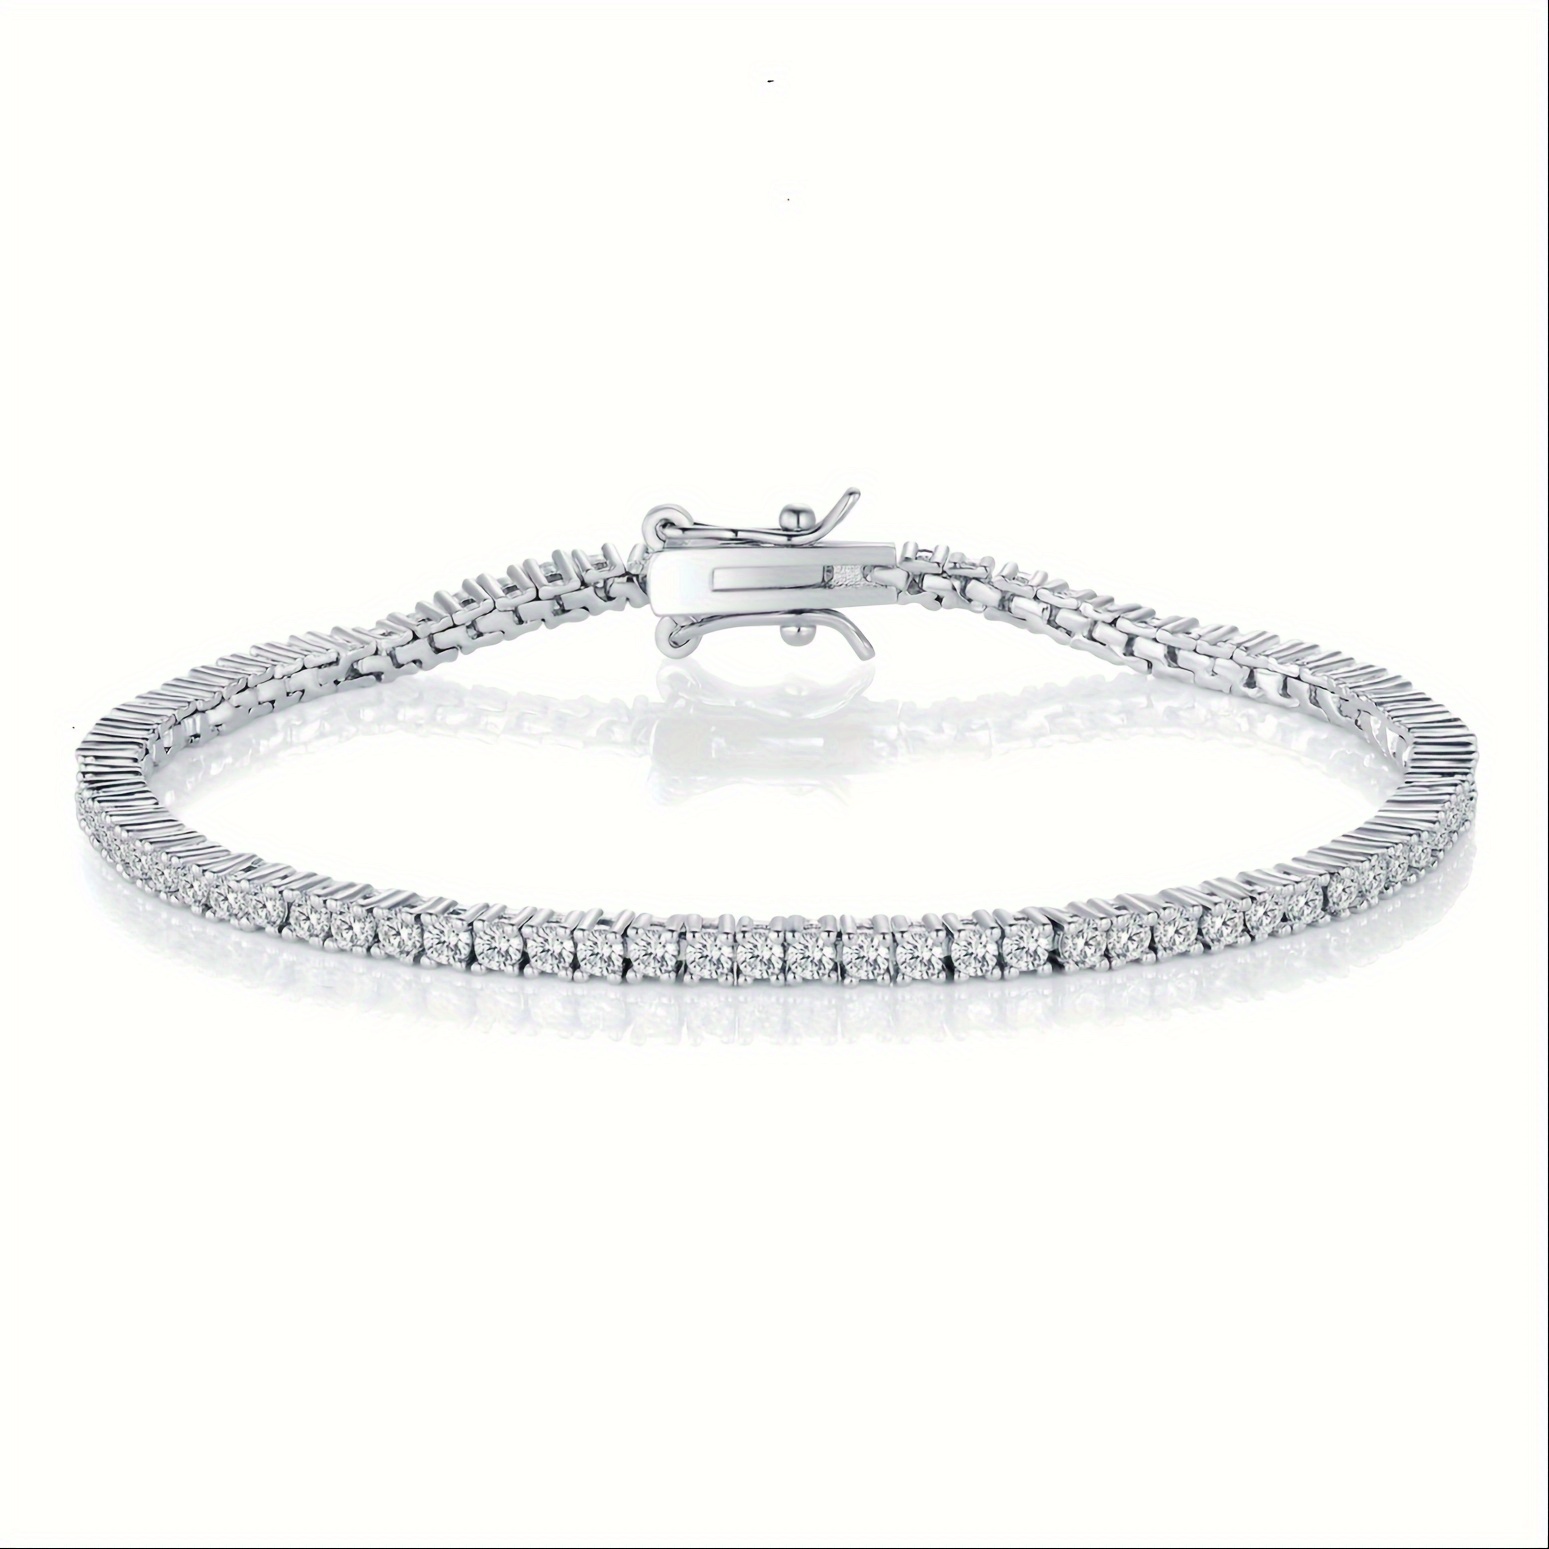 

Elegant & Classic Style, 2.0mm Tennis Bracelet, Cubic Zirconia Inlaid Classic Tennis Bracelet, Fashion Delicate Accessory For Daily Wear